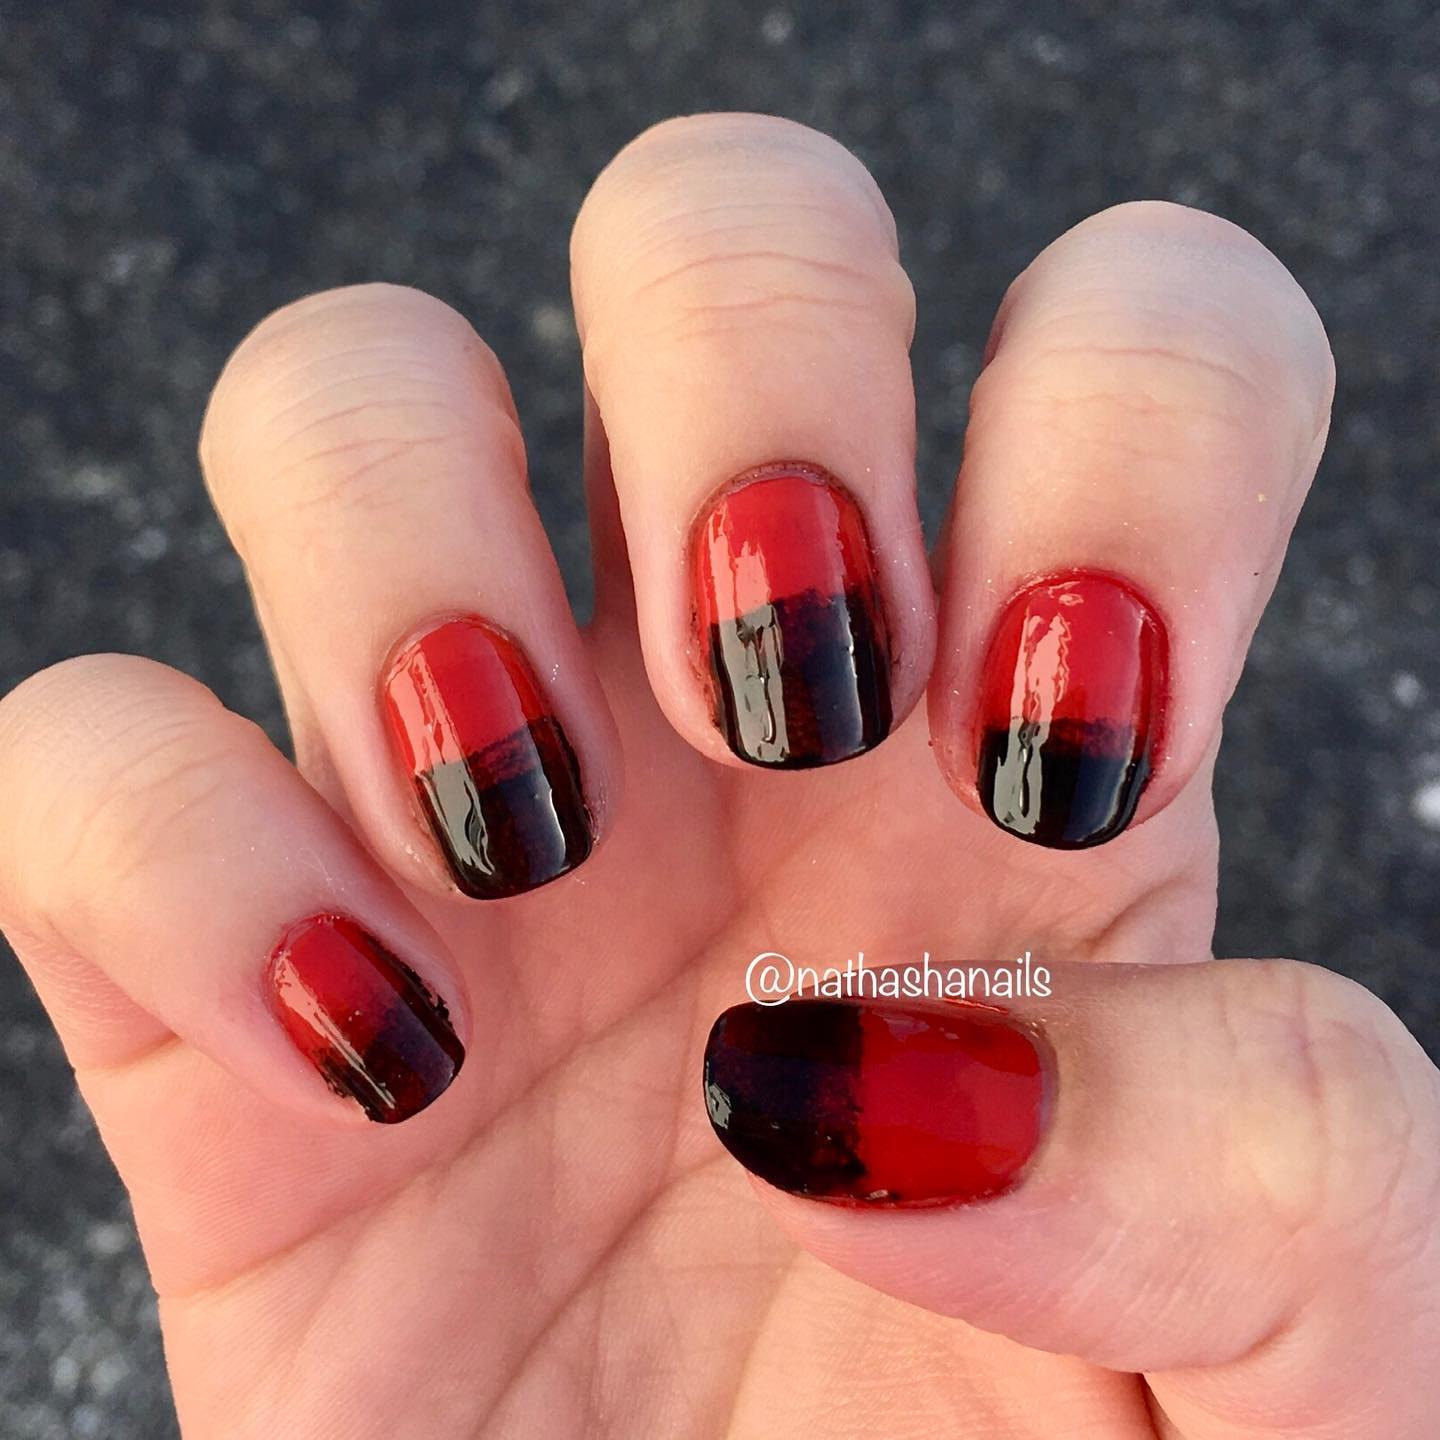 You can have this black and red nail design at home because it is so easy to create! All you need to do is to apply blood red nail polish to your nails and black one starting from the middle of them. Super easy and cool!